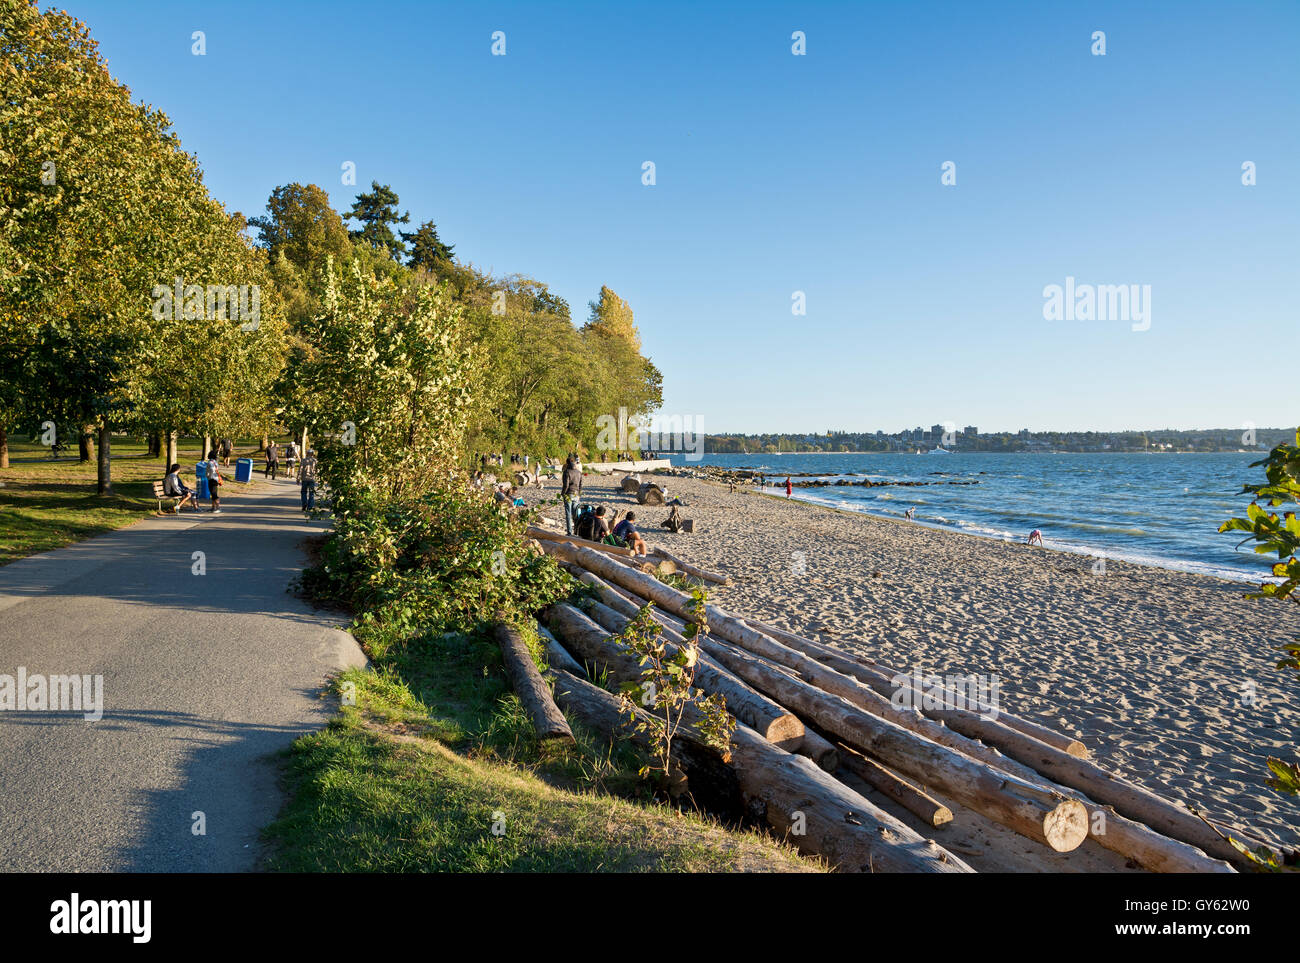 Vancouver Second Beach Pool